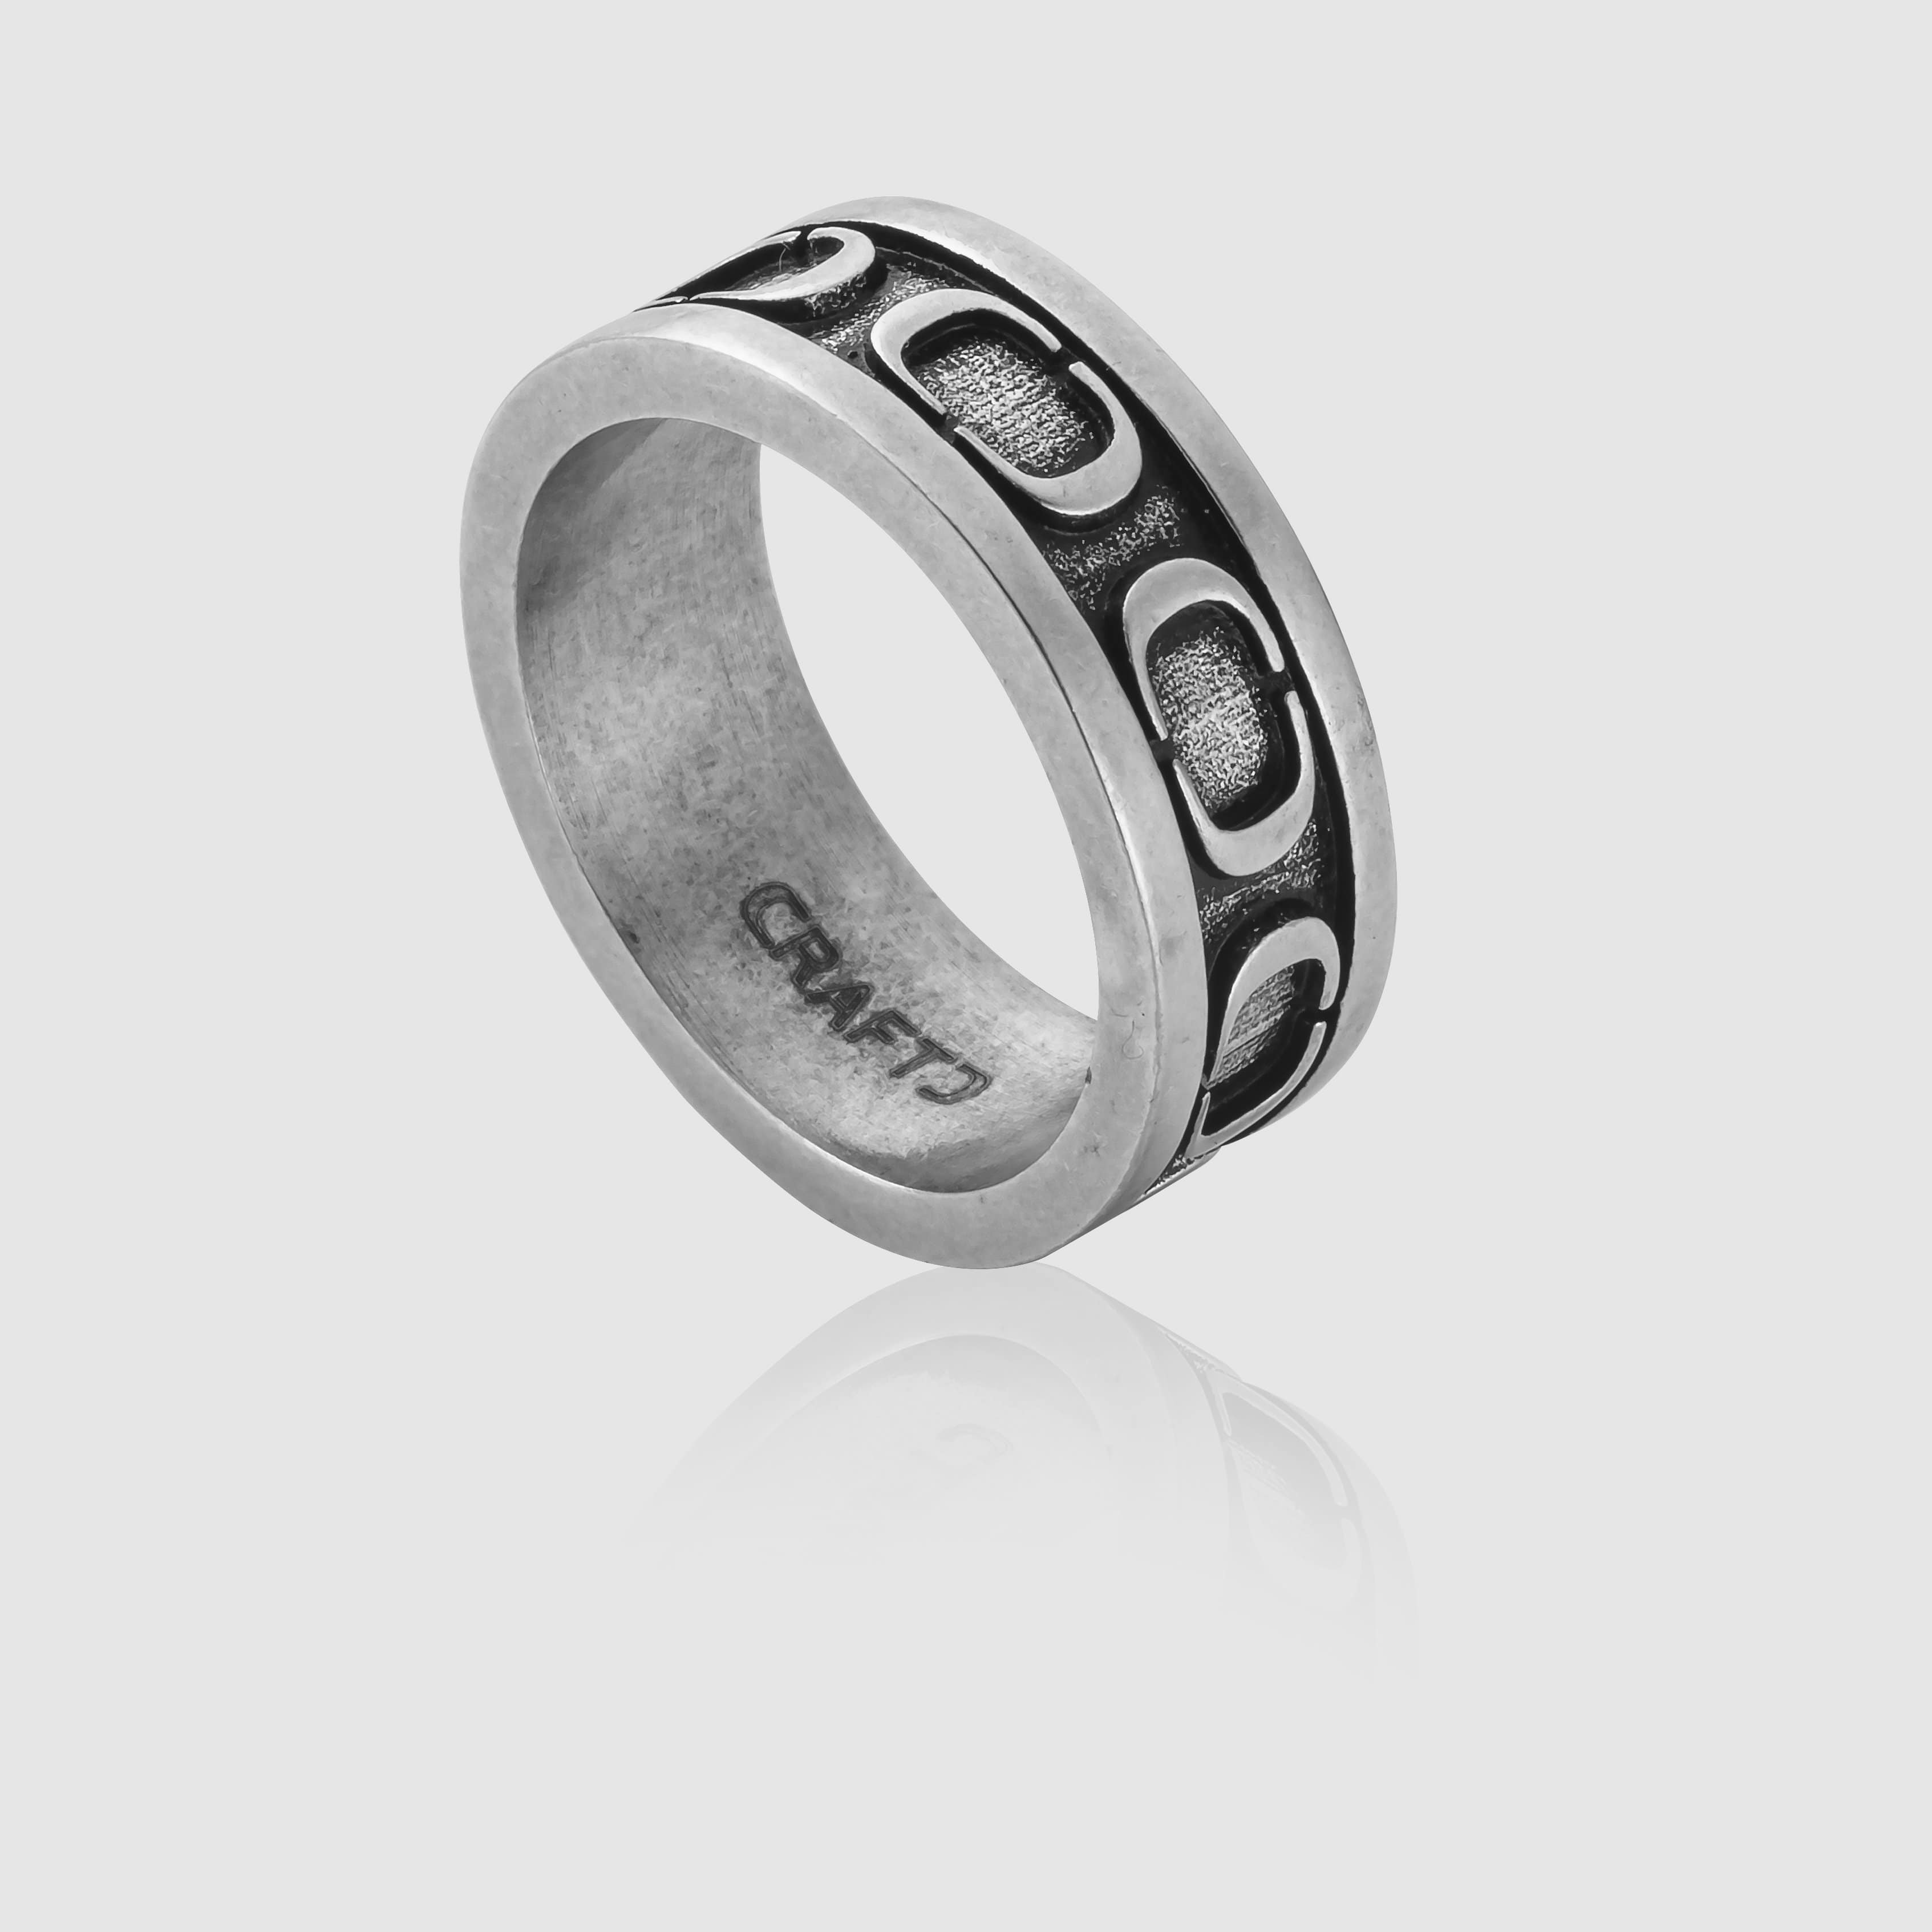 CRAFTD Band Ring (Silver)